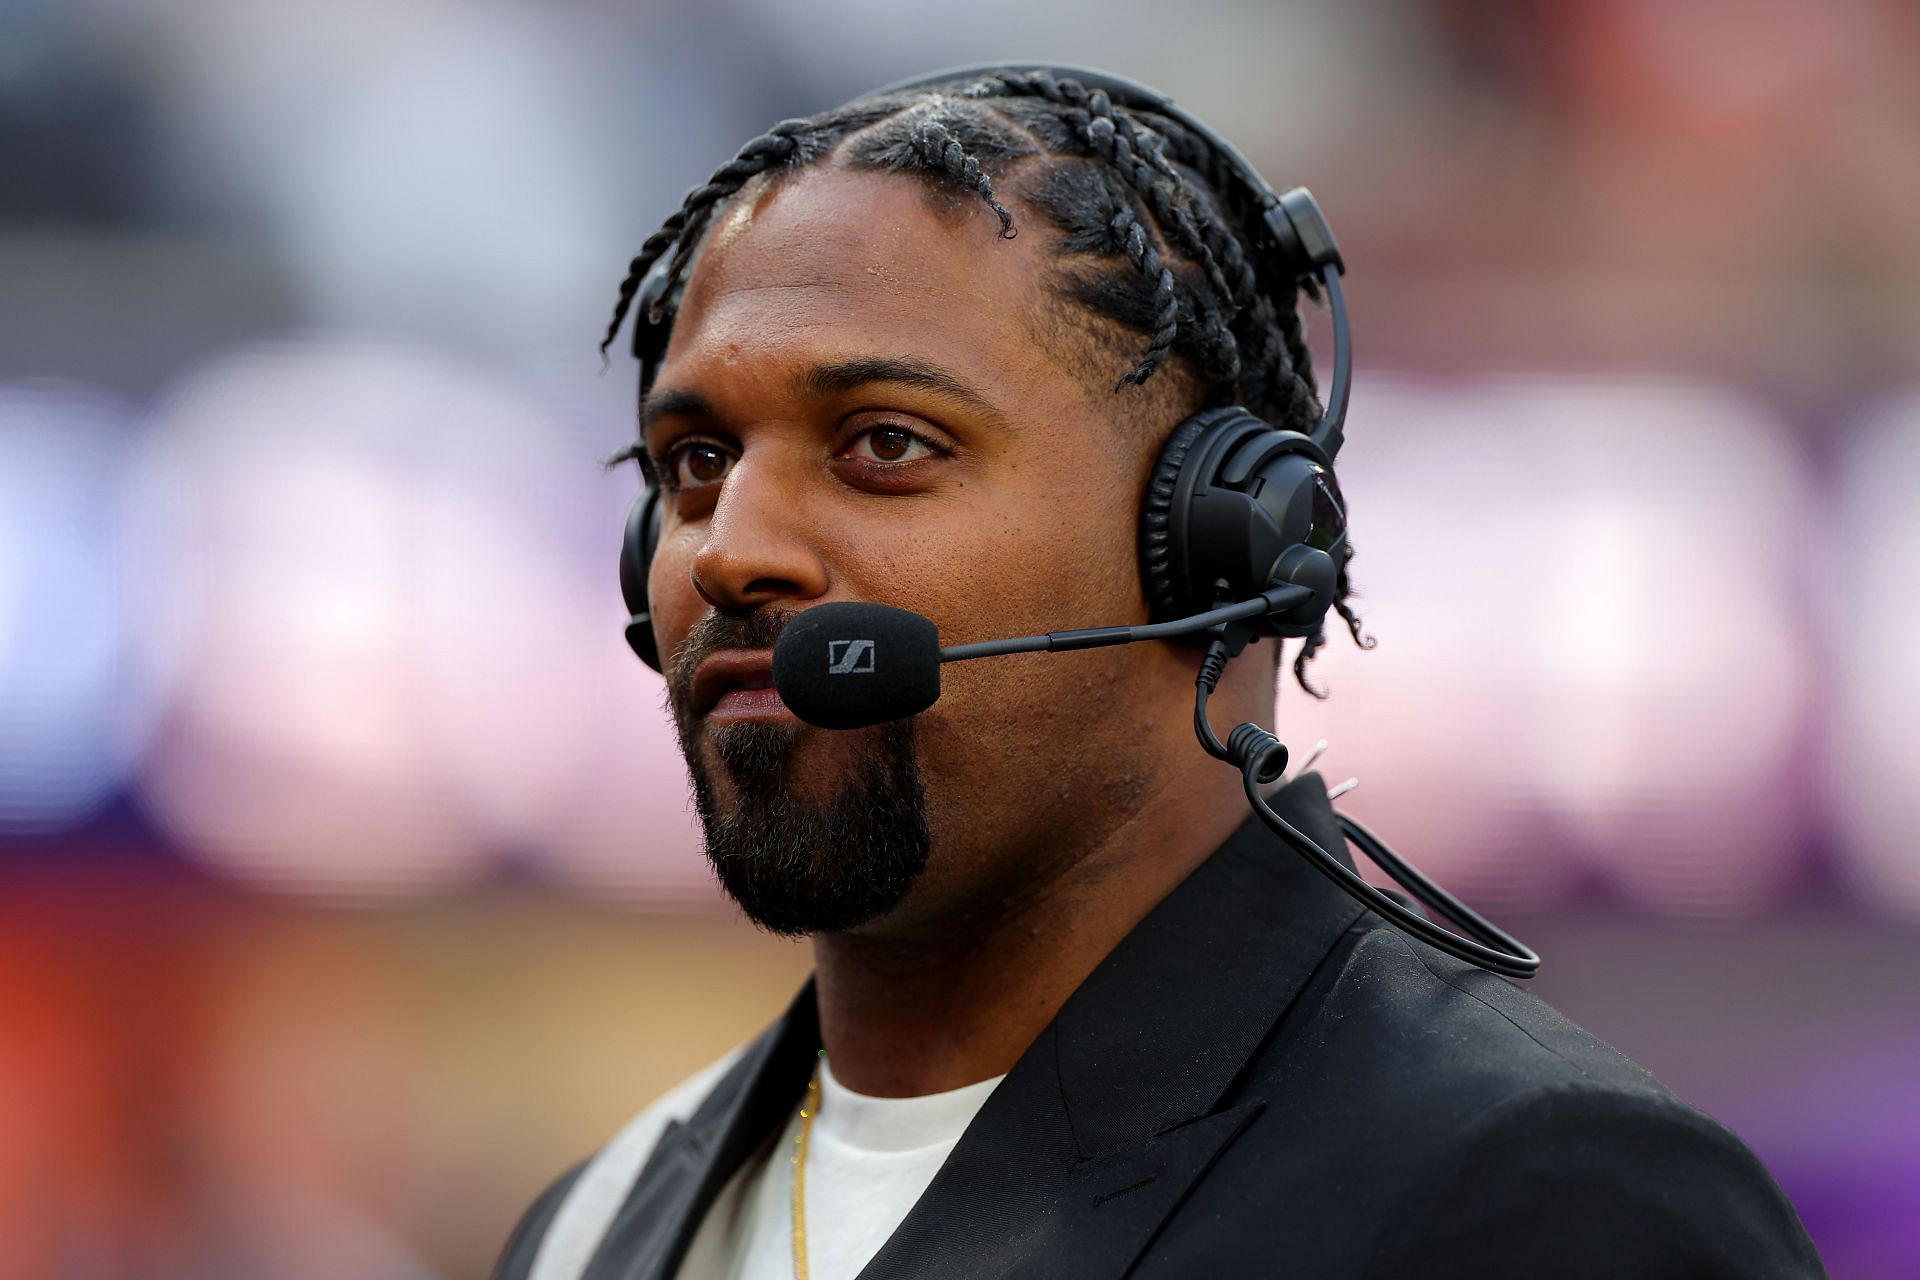 Cameron Jordan is arguably the most charismatic figure in the NFL